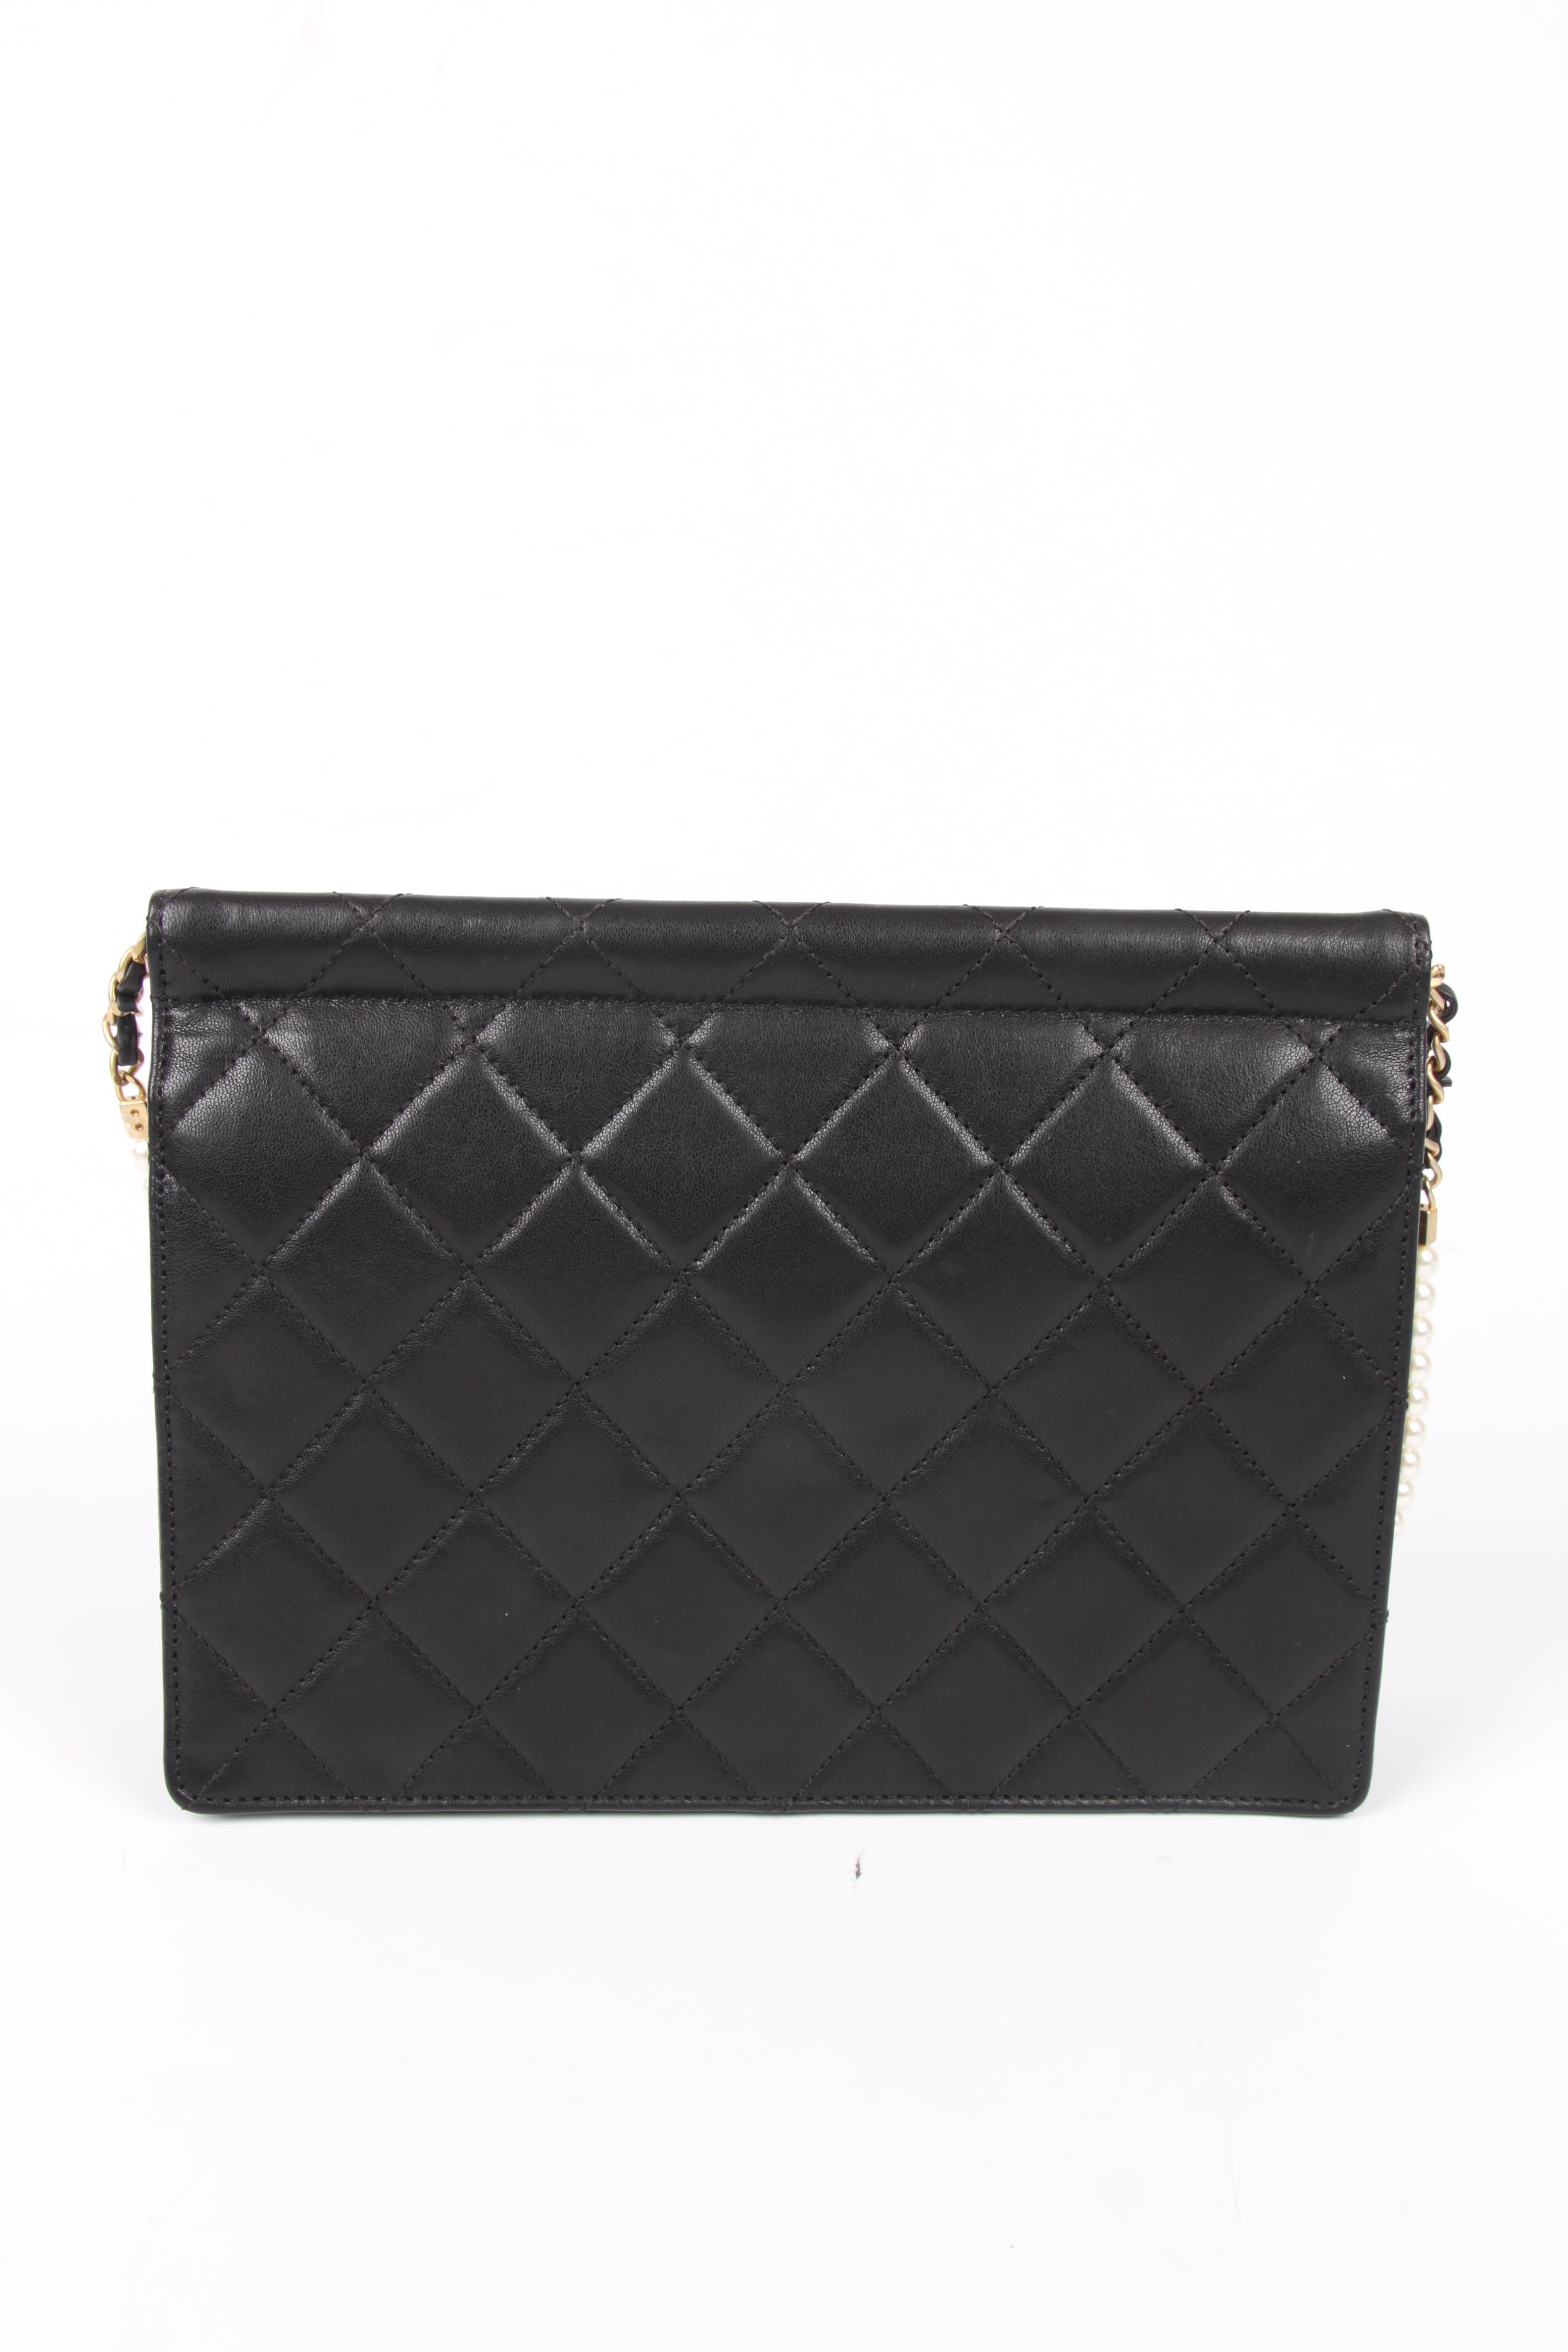 New! Chanel Quilted Flap Bag 2019 - black 1